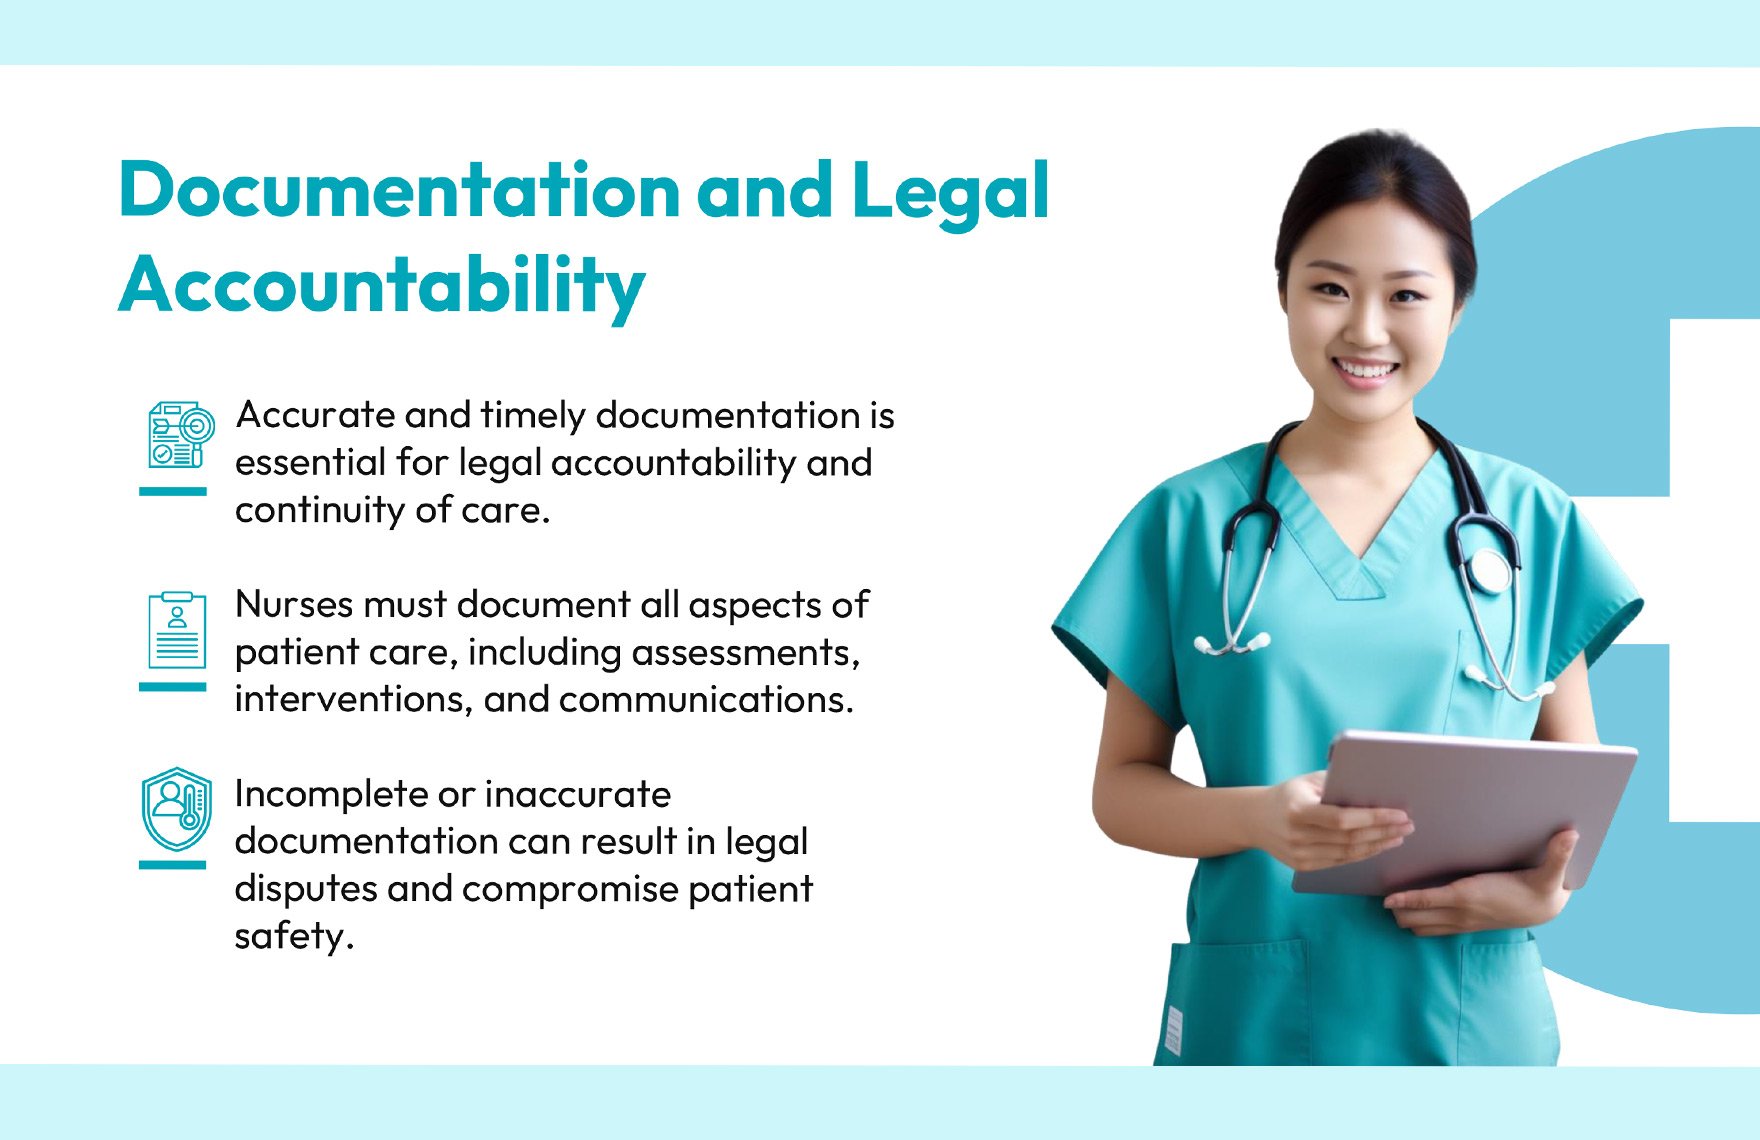 Legal and Ethical Issues in Nursing PPT Template